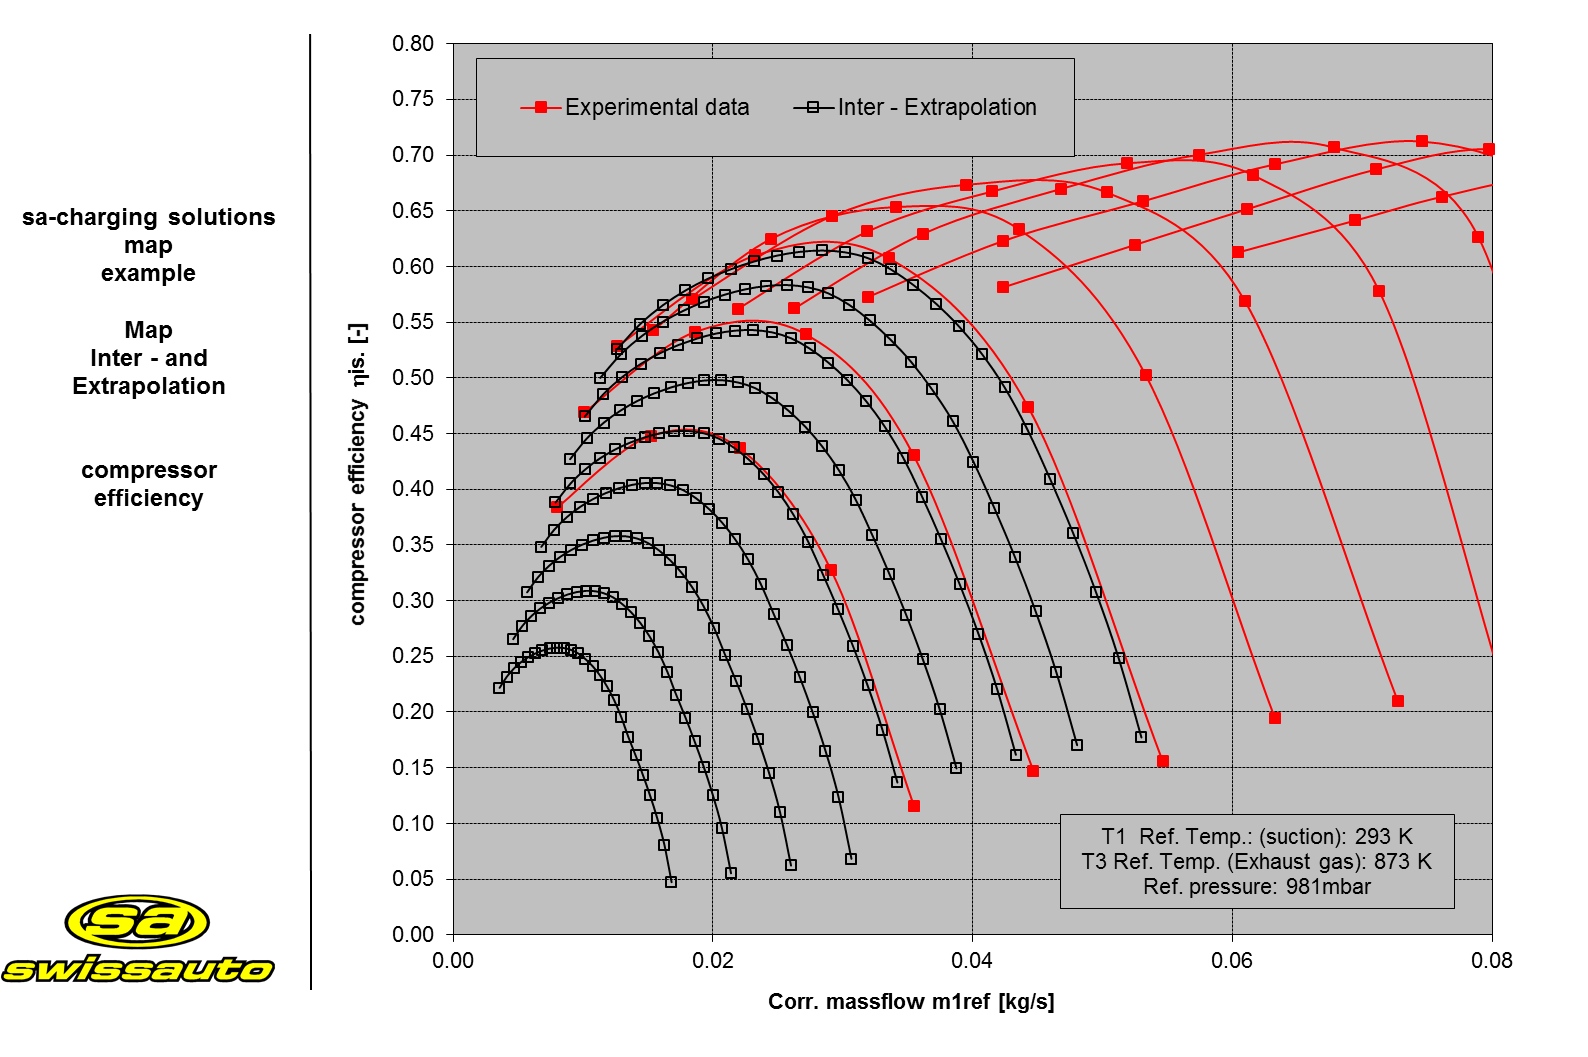 Inter- and extrapolation of the compressor efficiency